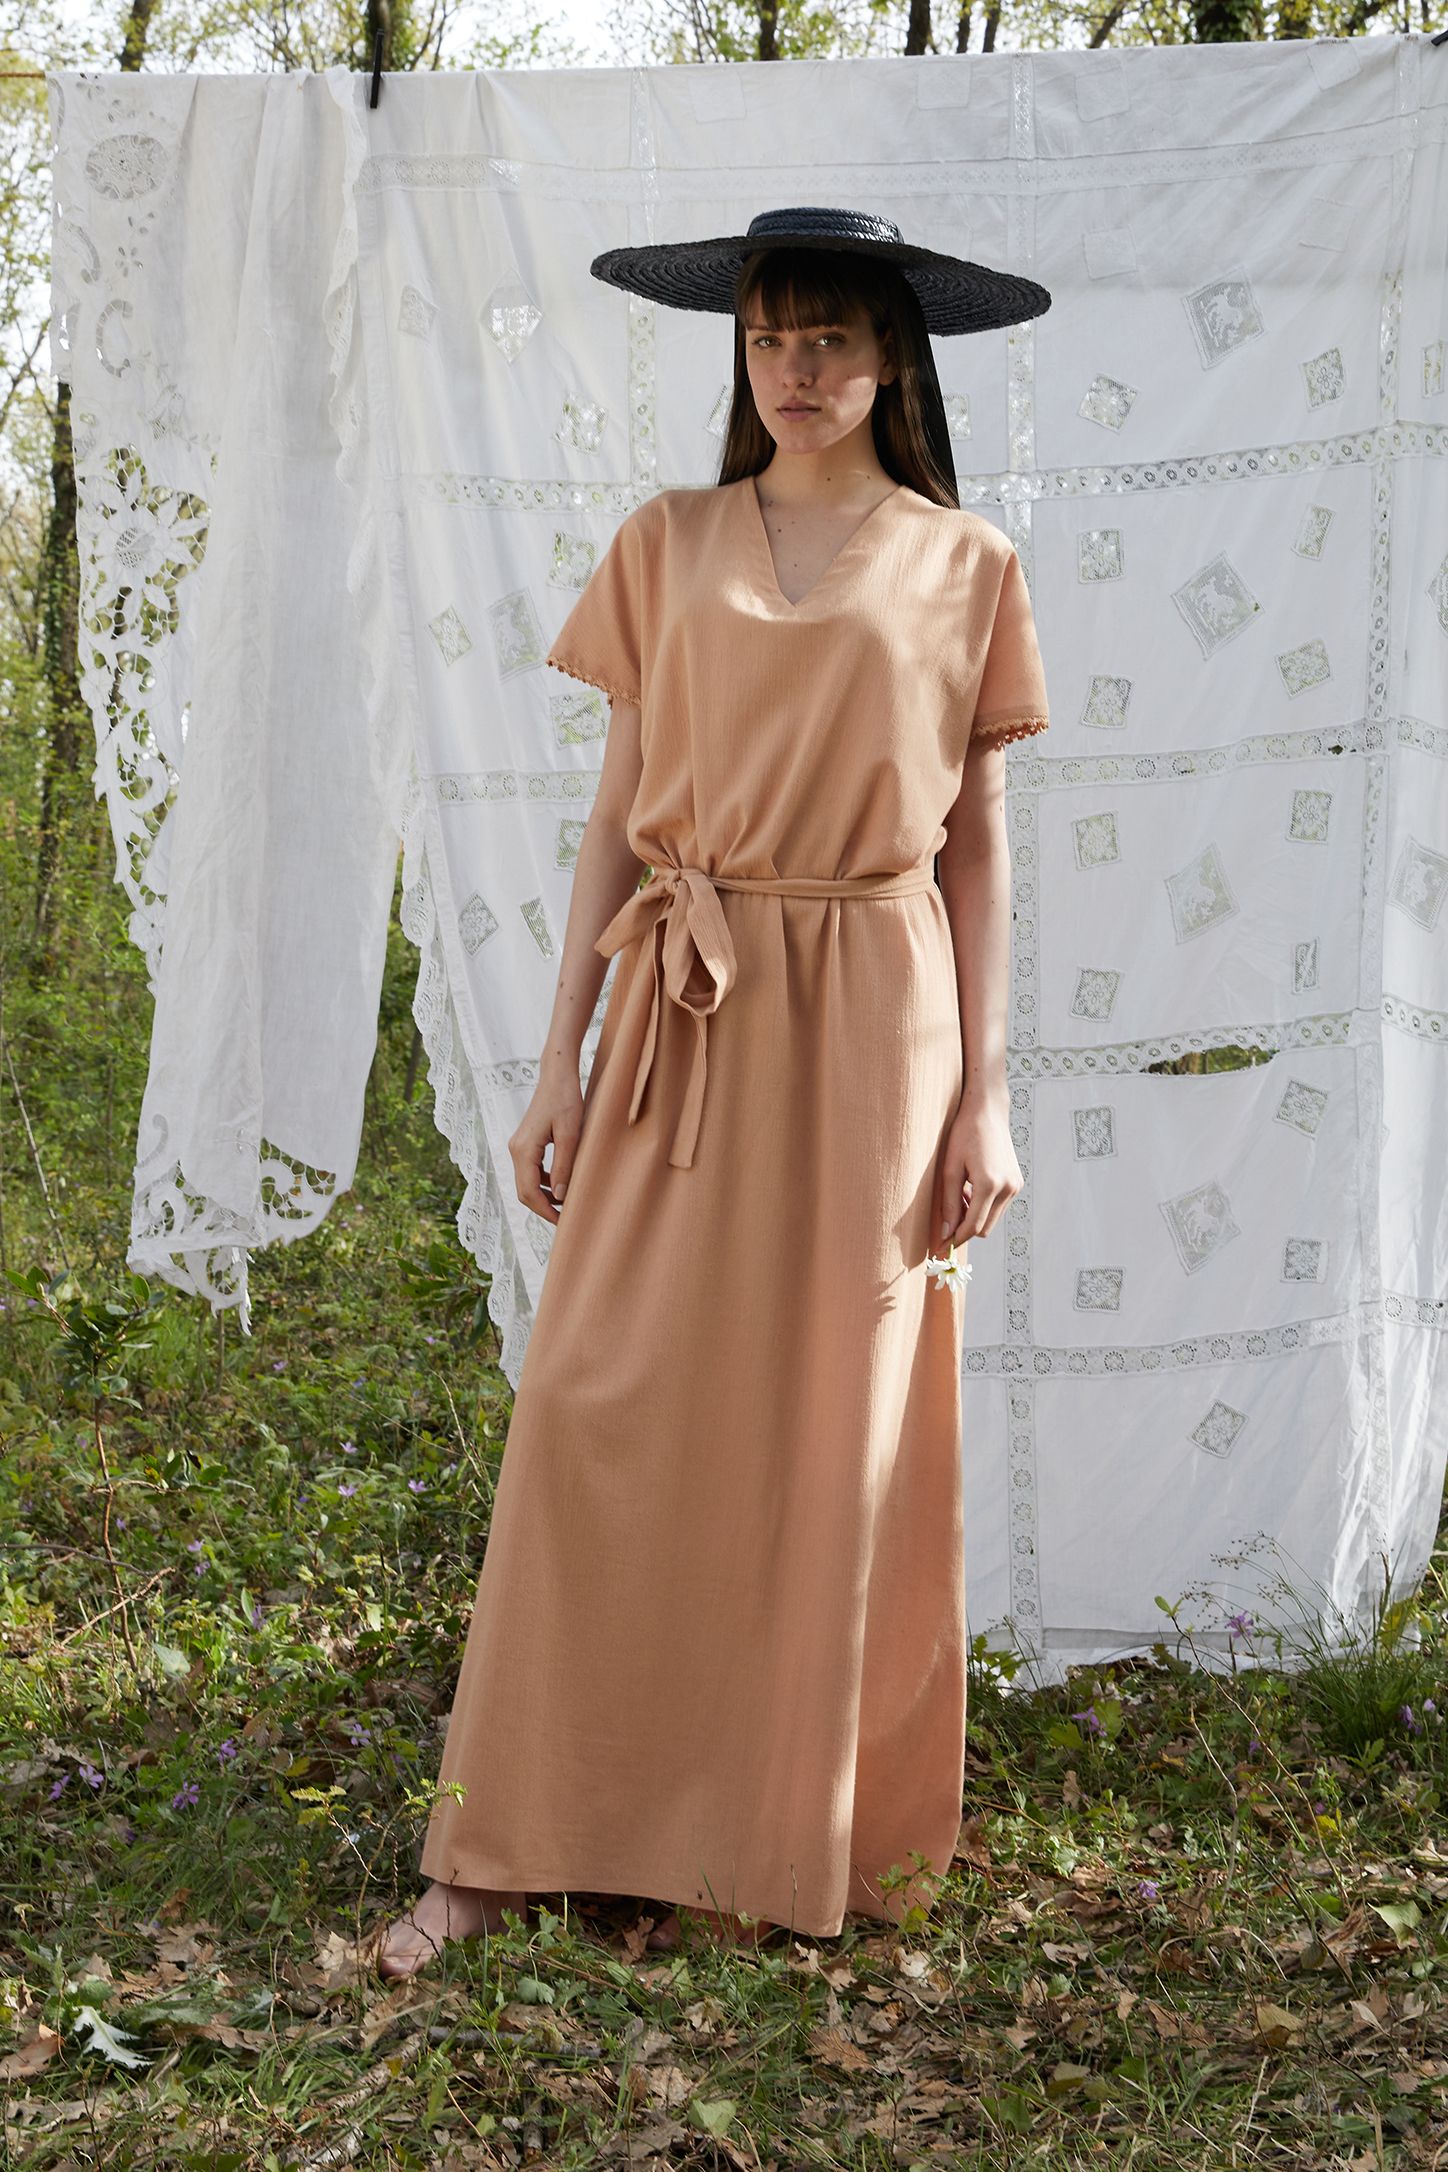 Hand-Woven Buldan Cloth Long Dress with Lace Collar and Belt